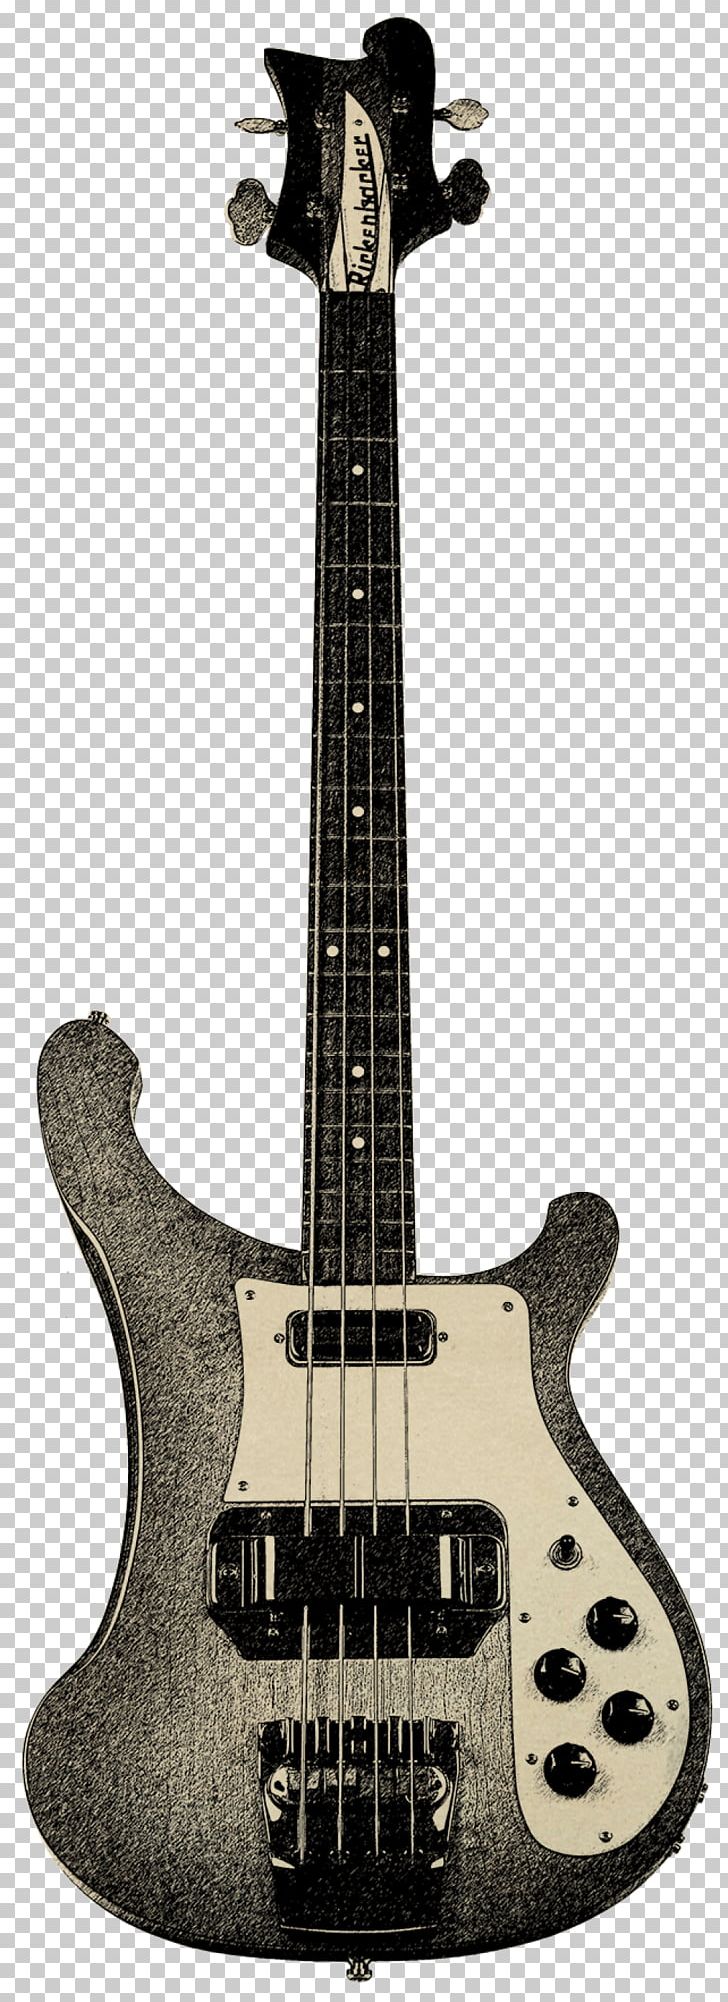 Bass Guitar Acoustic-electric Guitar Rickenbacker 4001 PNG, Clipart, Bass Guitar, Commodore 64, Double Bass, Electric Guitar, Electronic Musical Instrument Free PNG Download